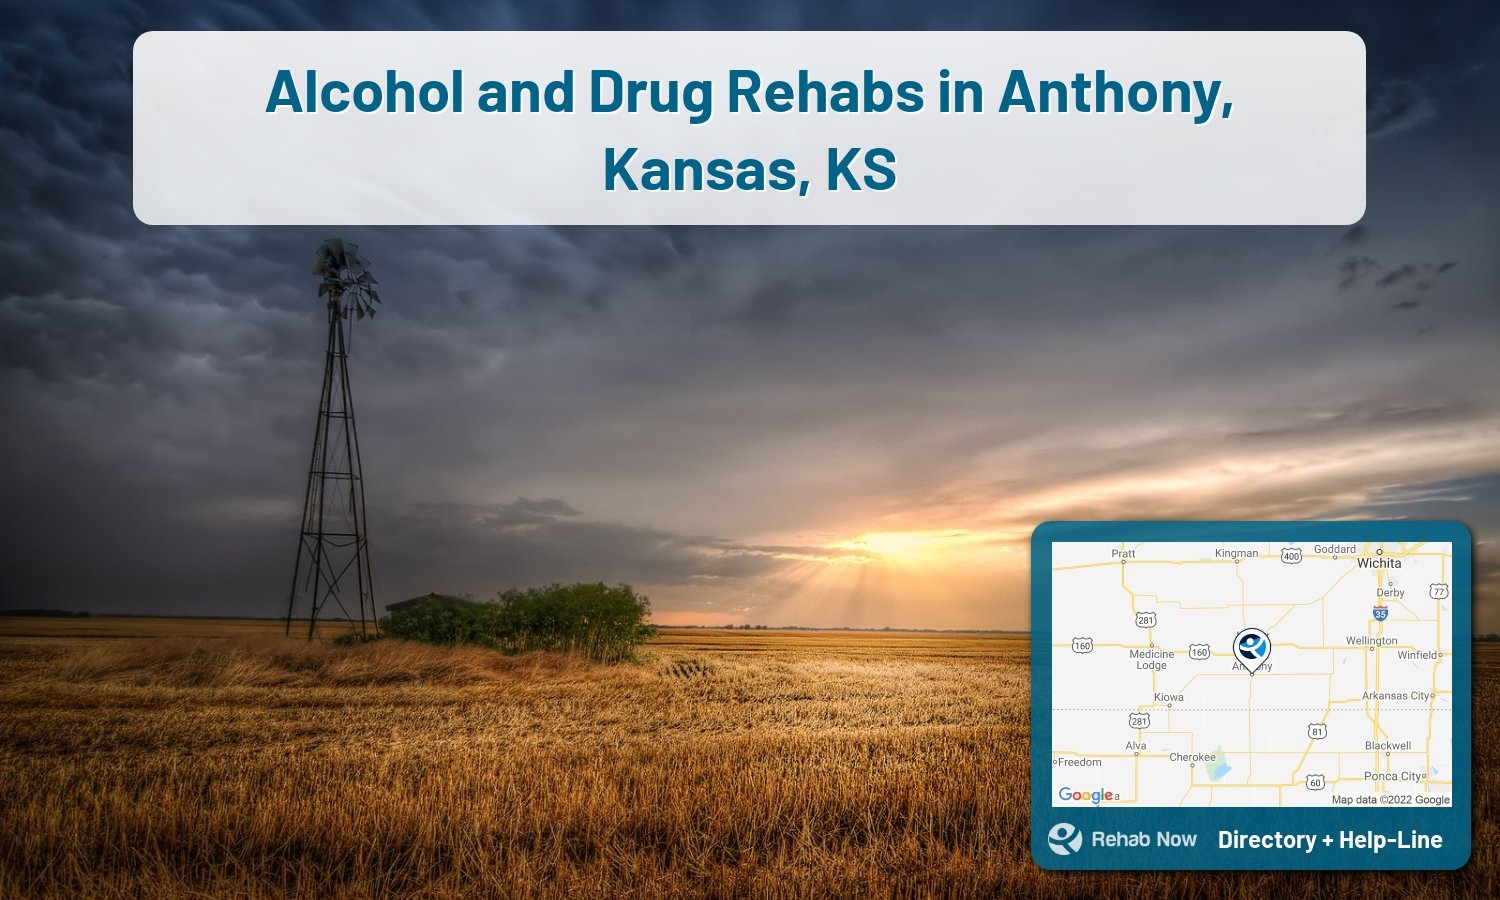 Our experts can help you find treatment now in Anthony, Kansas. We list drug rehab and alcohol centers in Kansas.